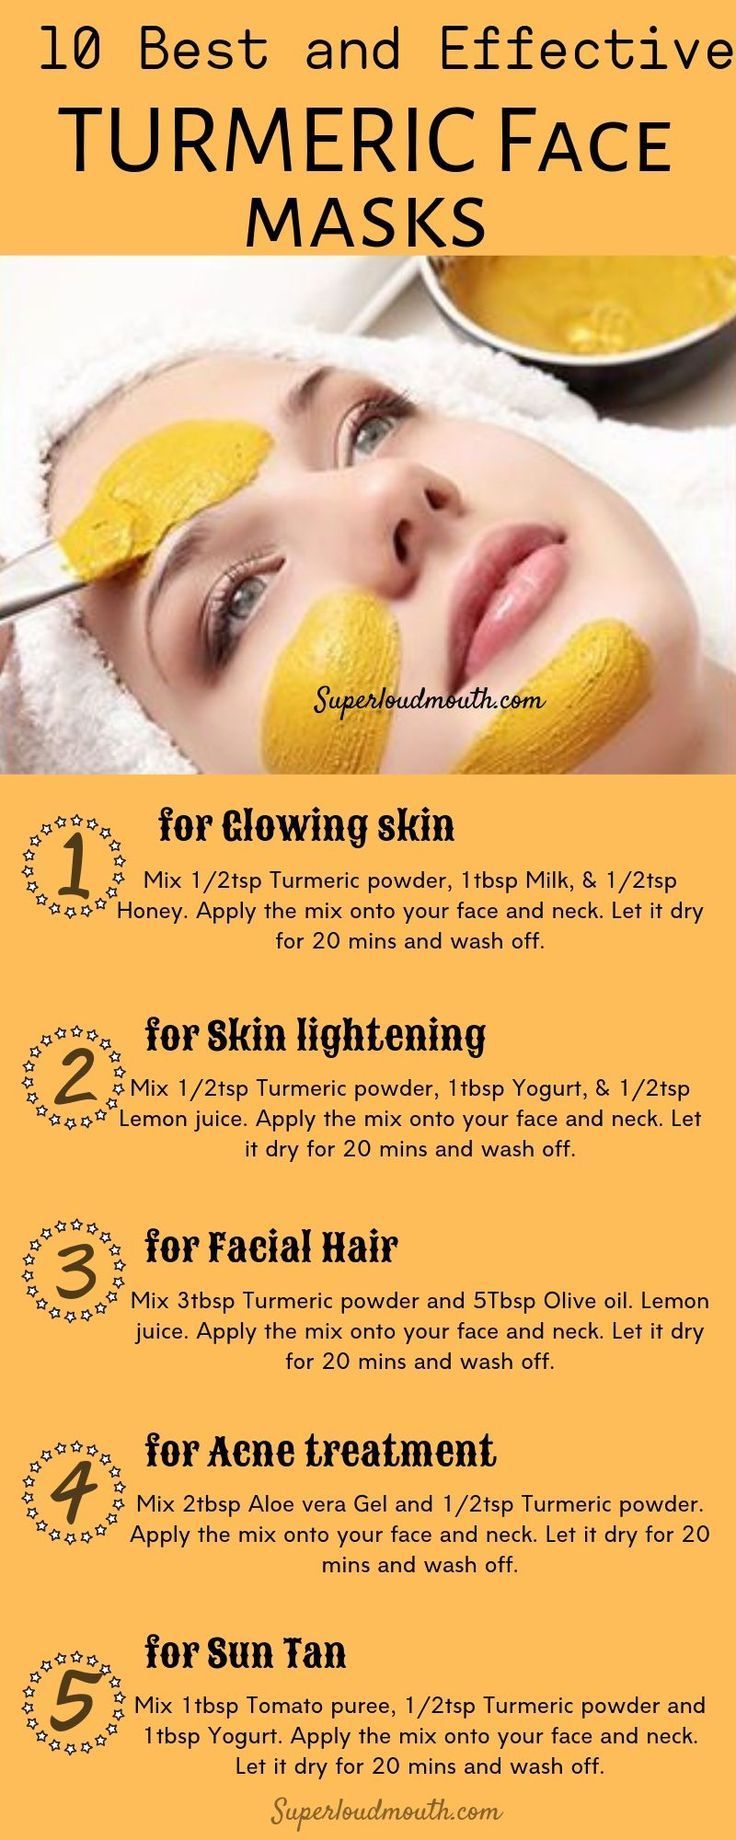 How I Improved My Skin Complexion with TURMERIC FACE MASK In One Day - How I Improved My Skin Complexion with TURMERIC FACE MASK In One Day -   15 beauty Mask ideas